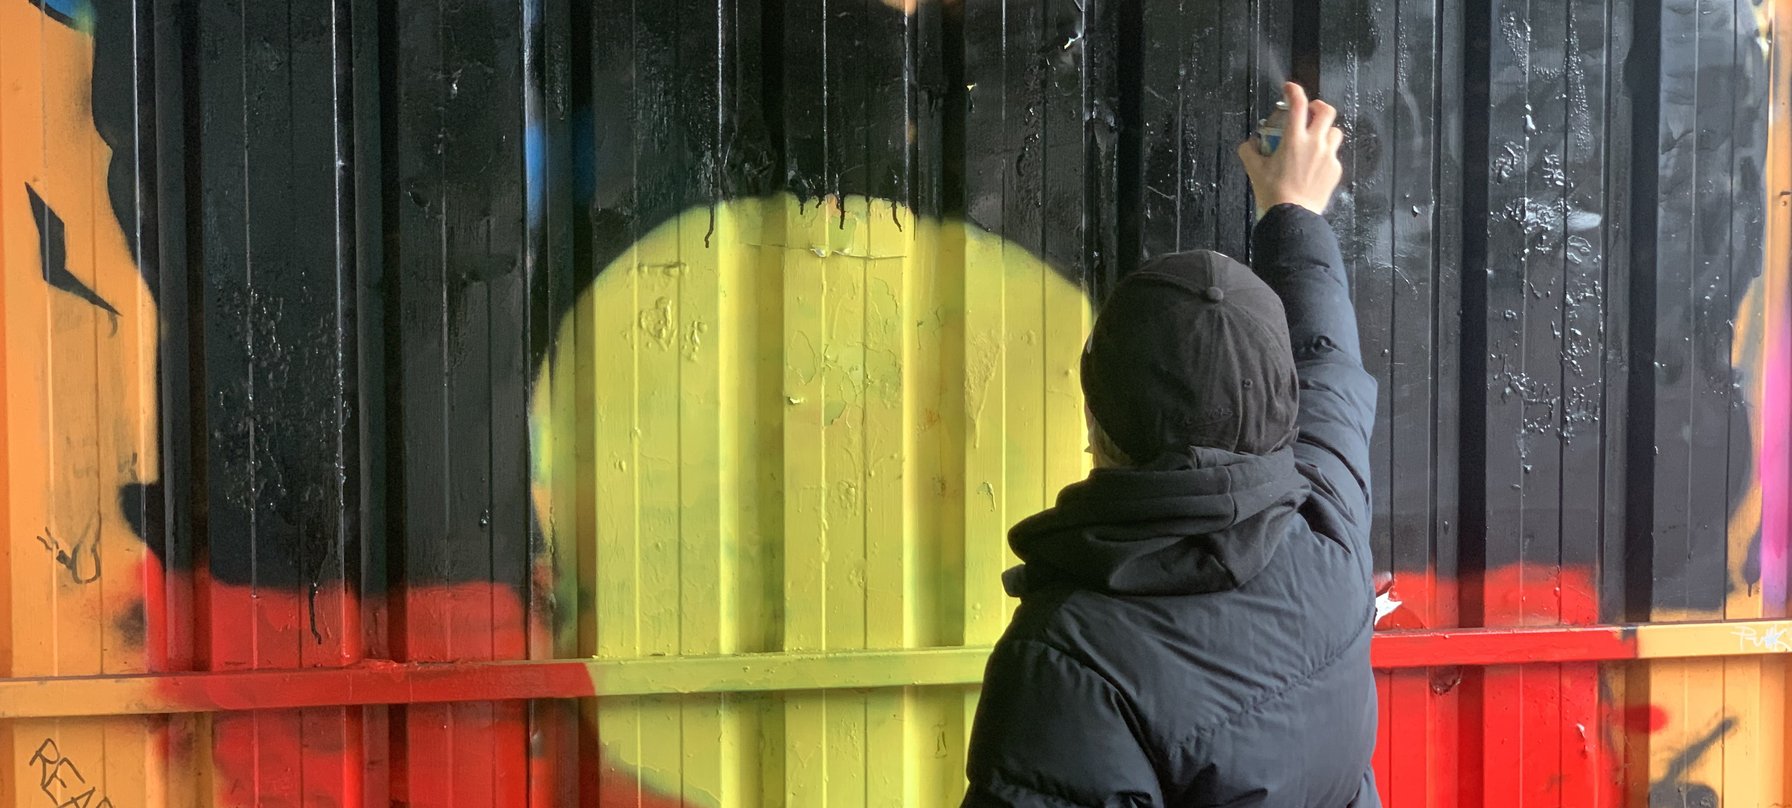 A photo of a person spray painting an artwork of an aboriginal flag.